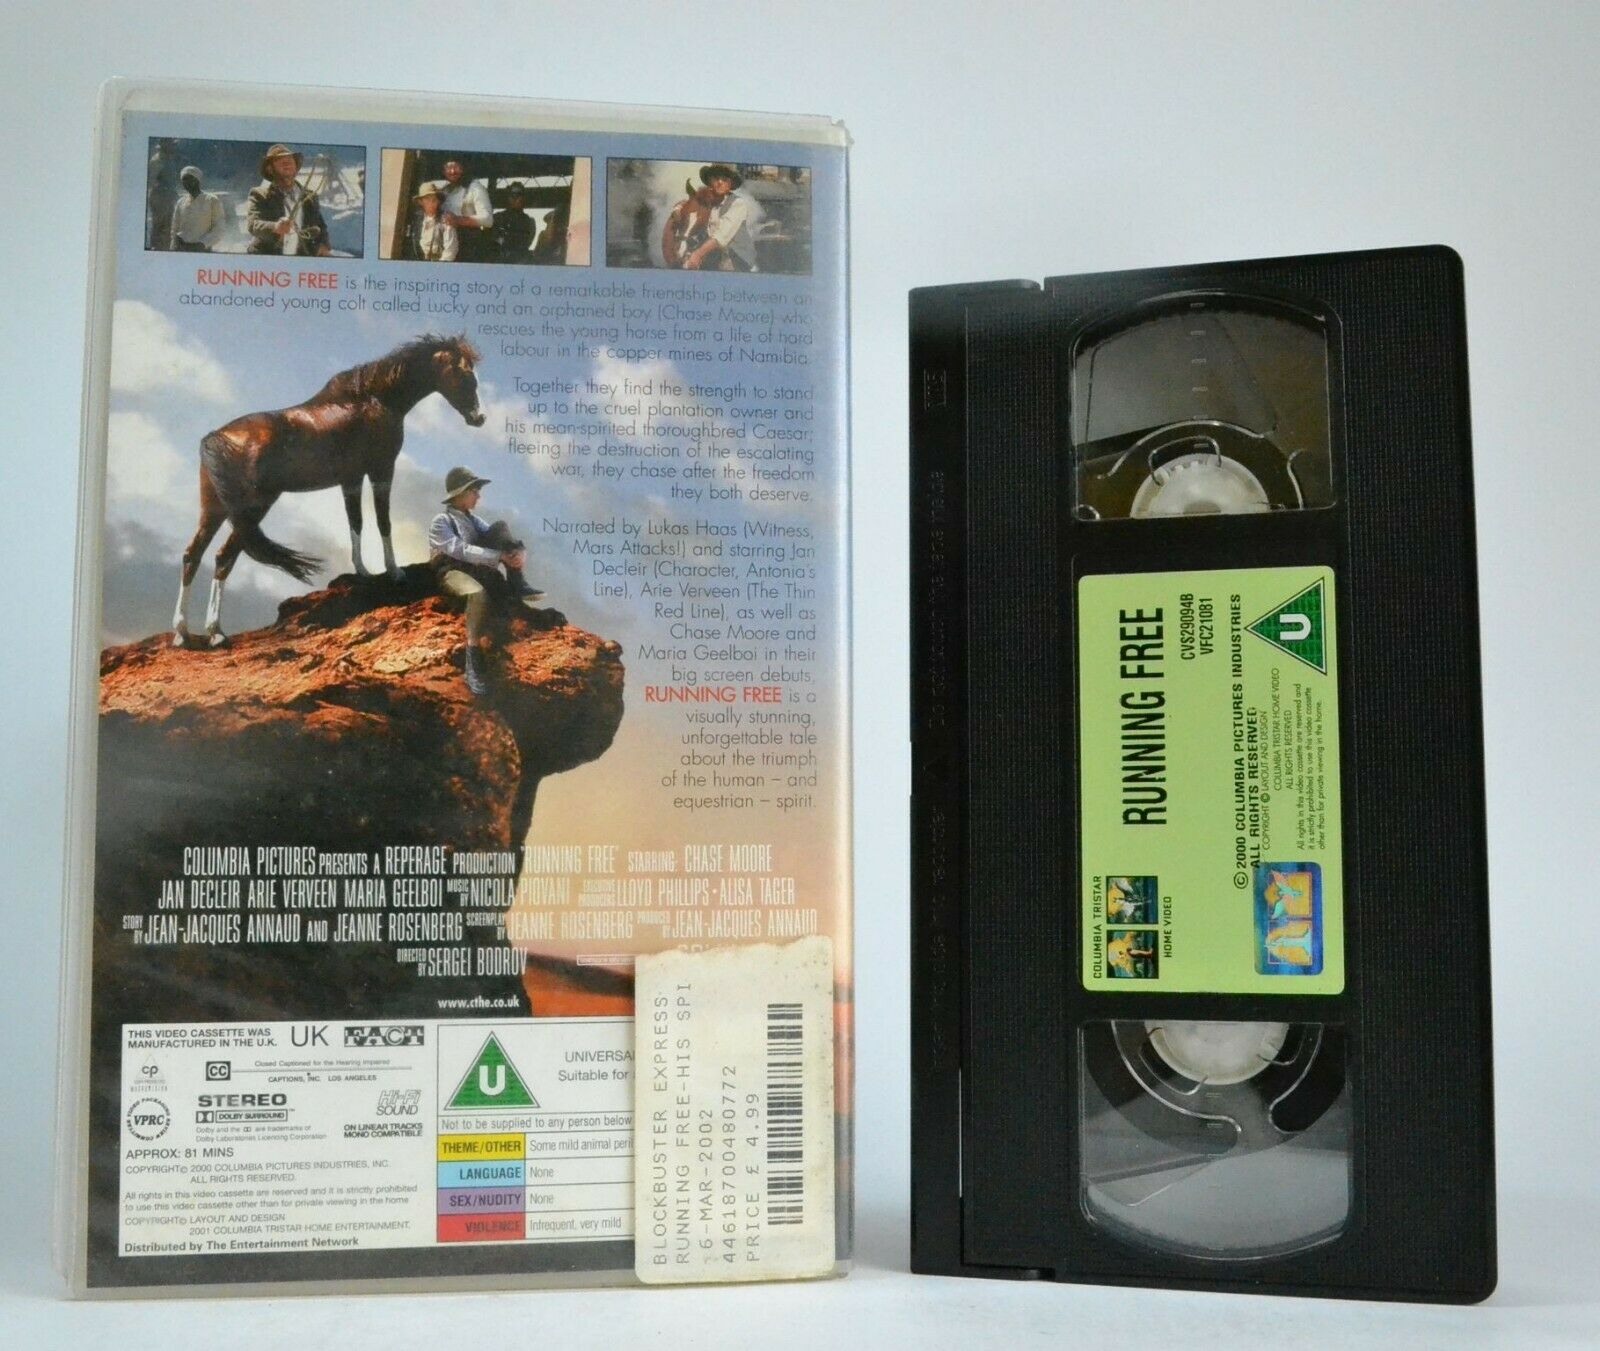 Running Free (2000): Remarkable Frendship - Family/Adventure - Large Box - VHS-